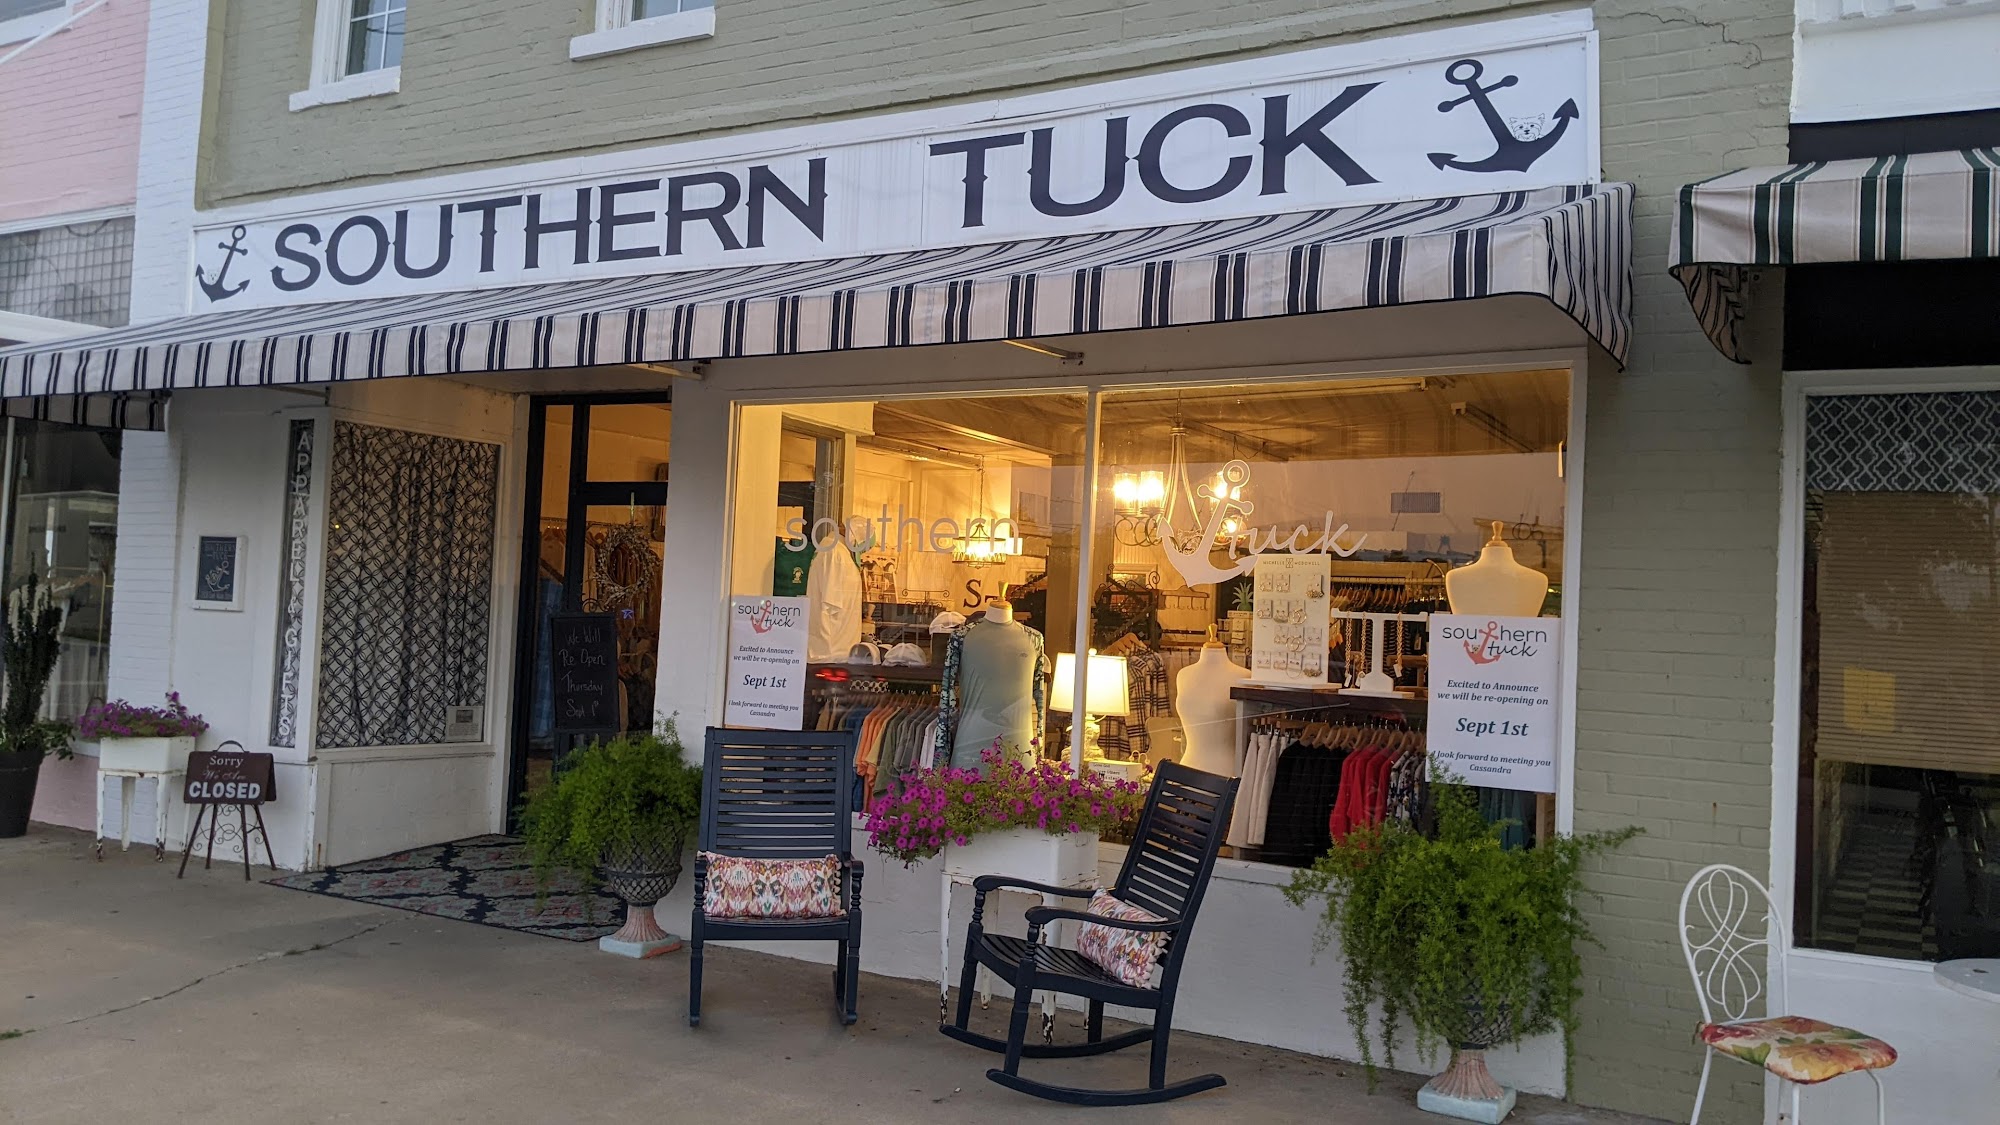 Southern Tuck